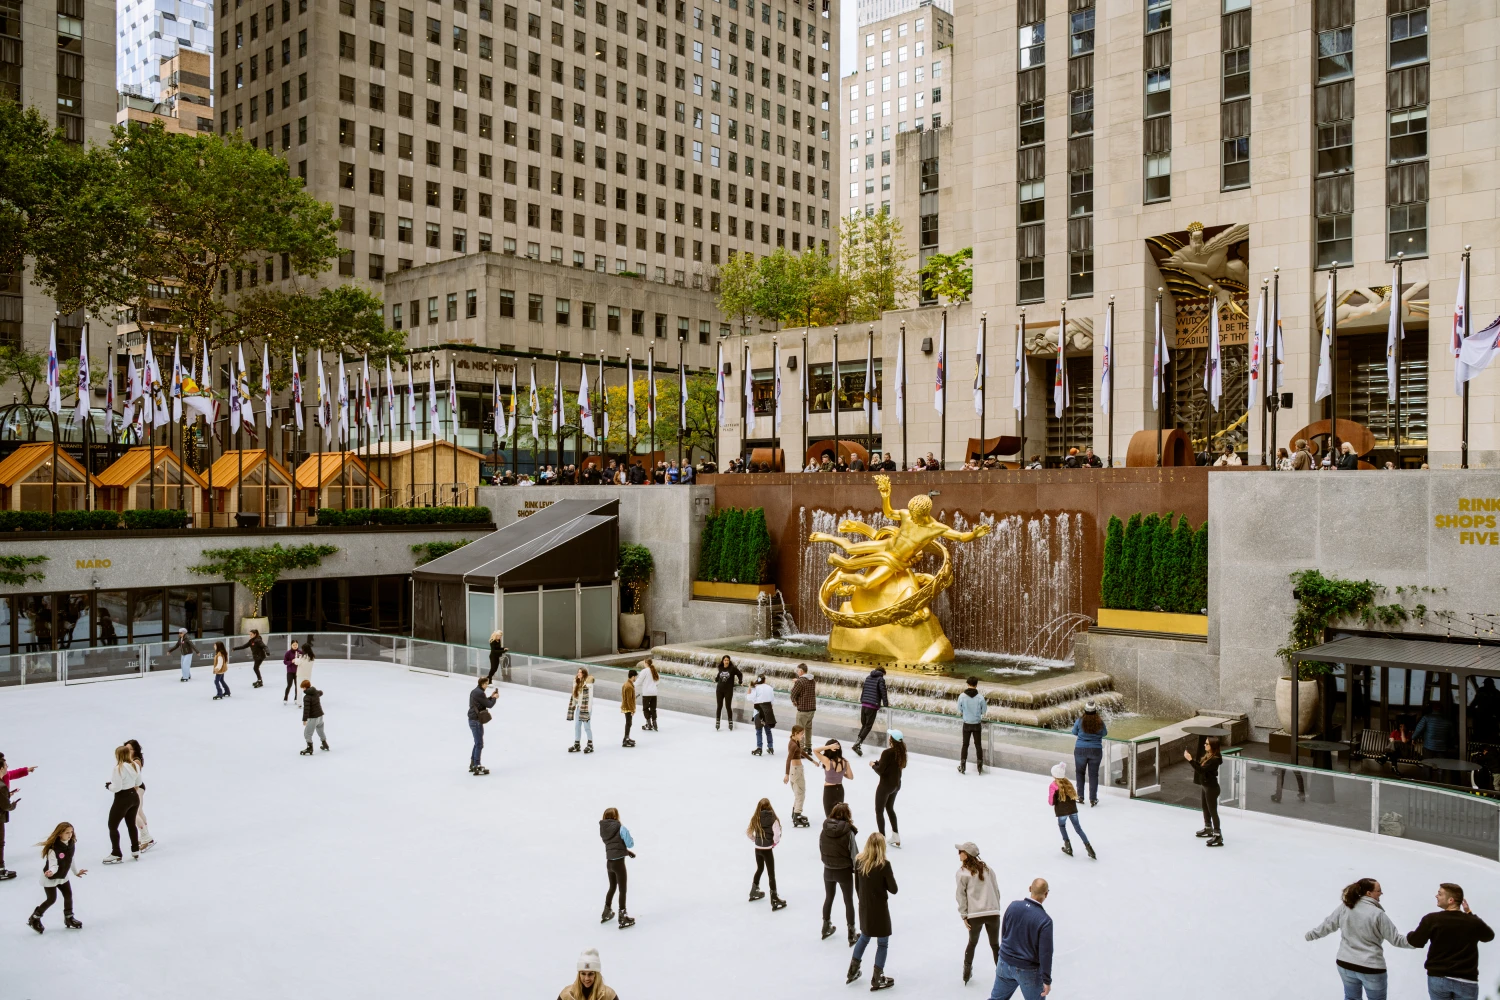 The Rink at Rockefeller Plaza: What to expect - 5